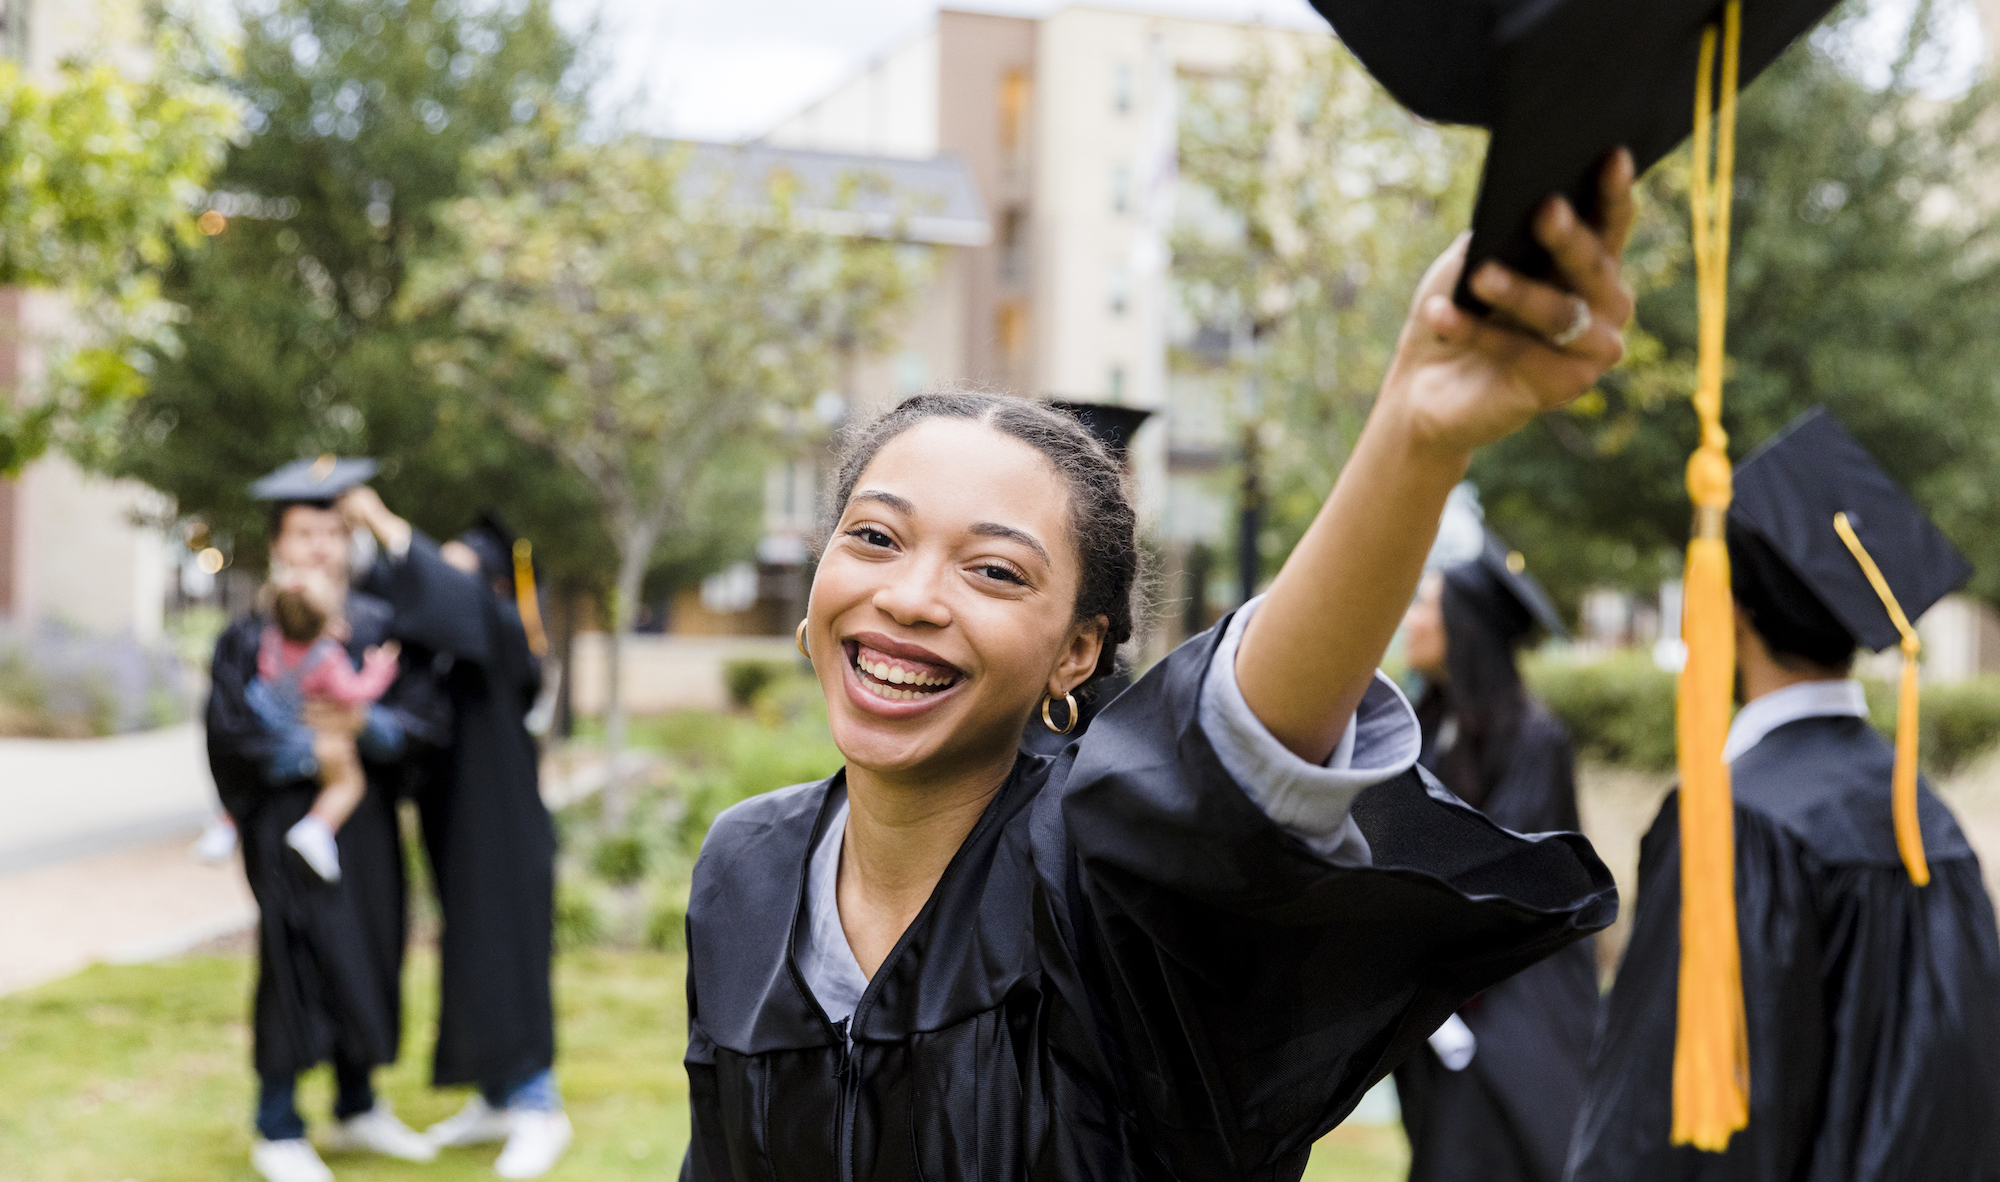 A young female graduate smiles at the camera while holding her mortarboard